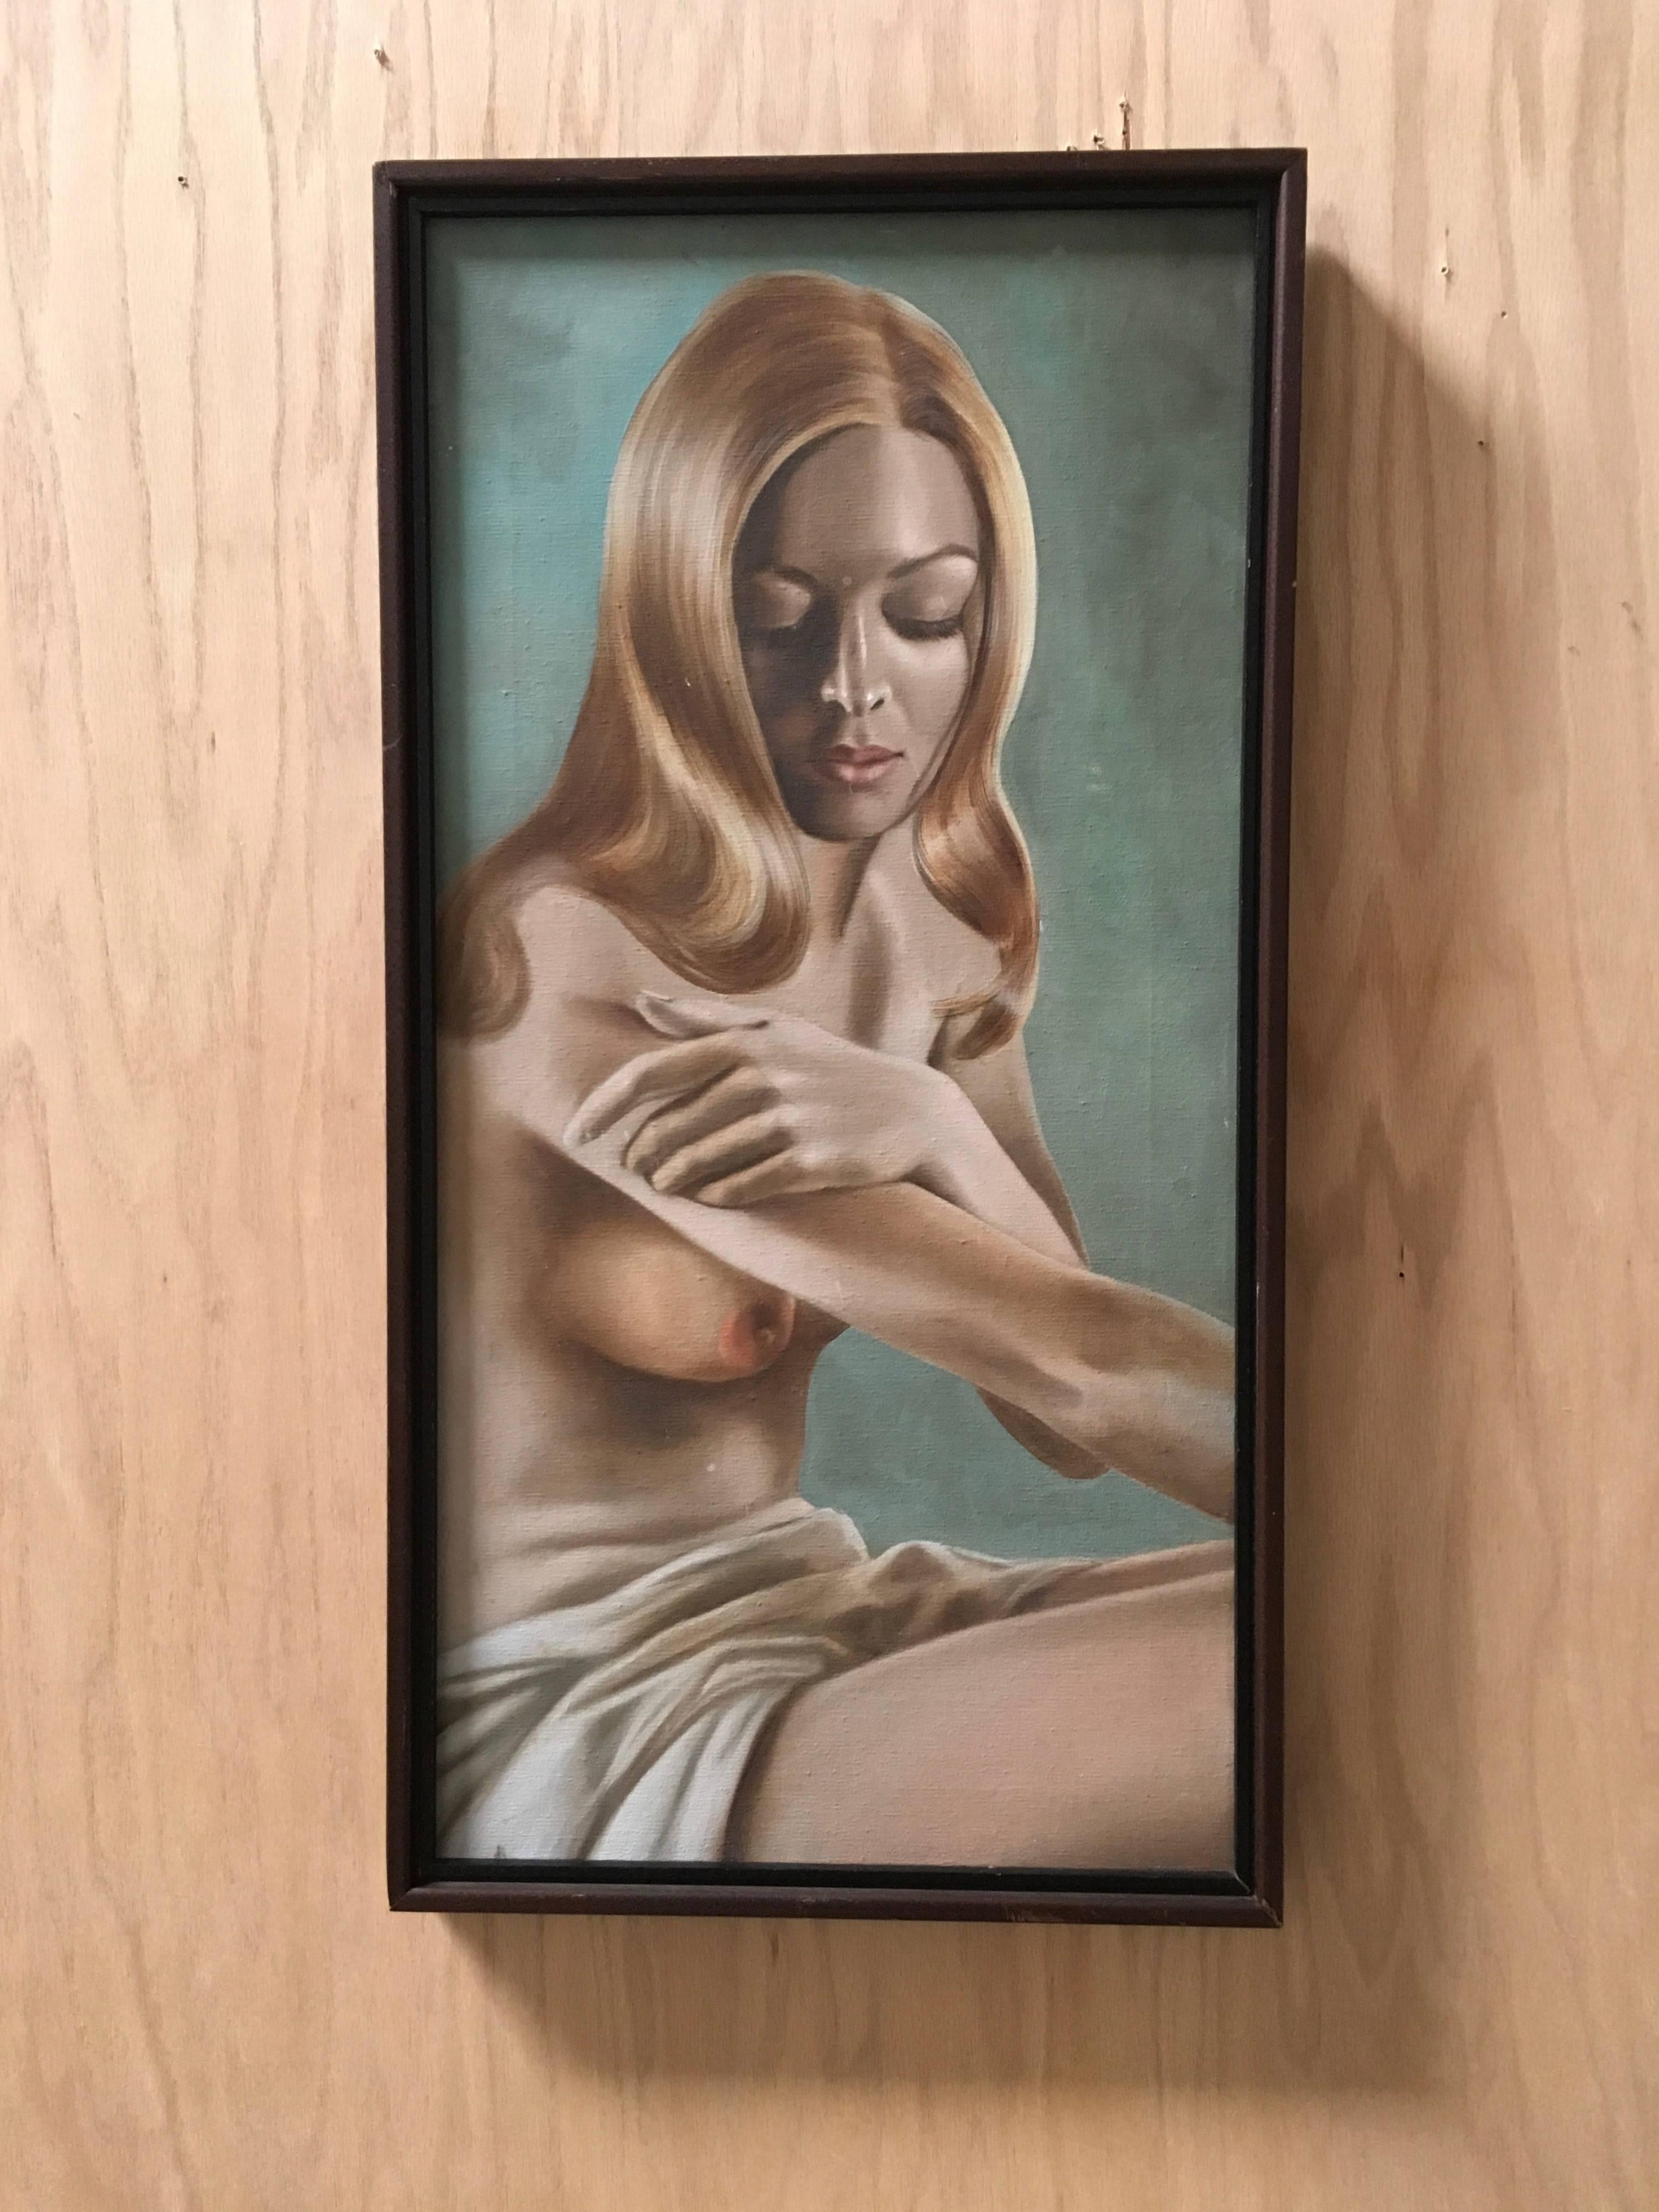 Oil on canvas nude portrait of a young woman by Lynn Lupetti California artist, circa 1970.